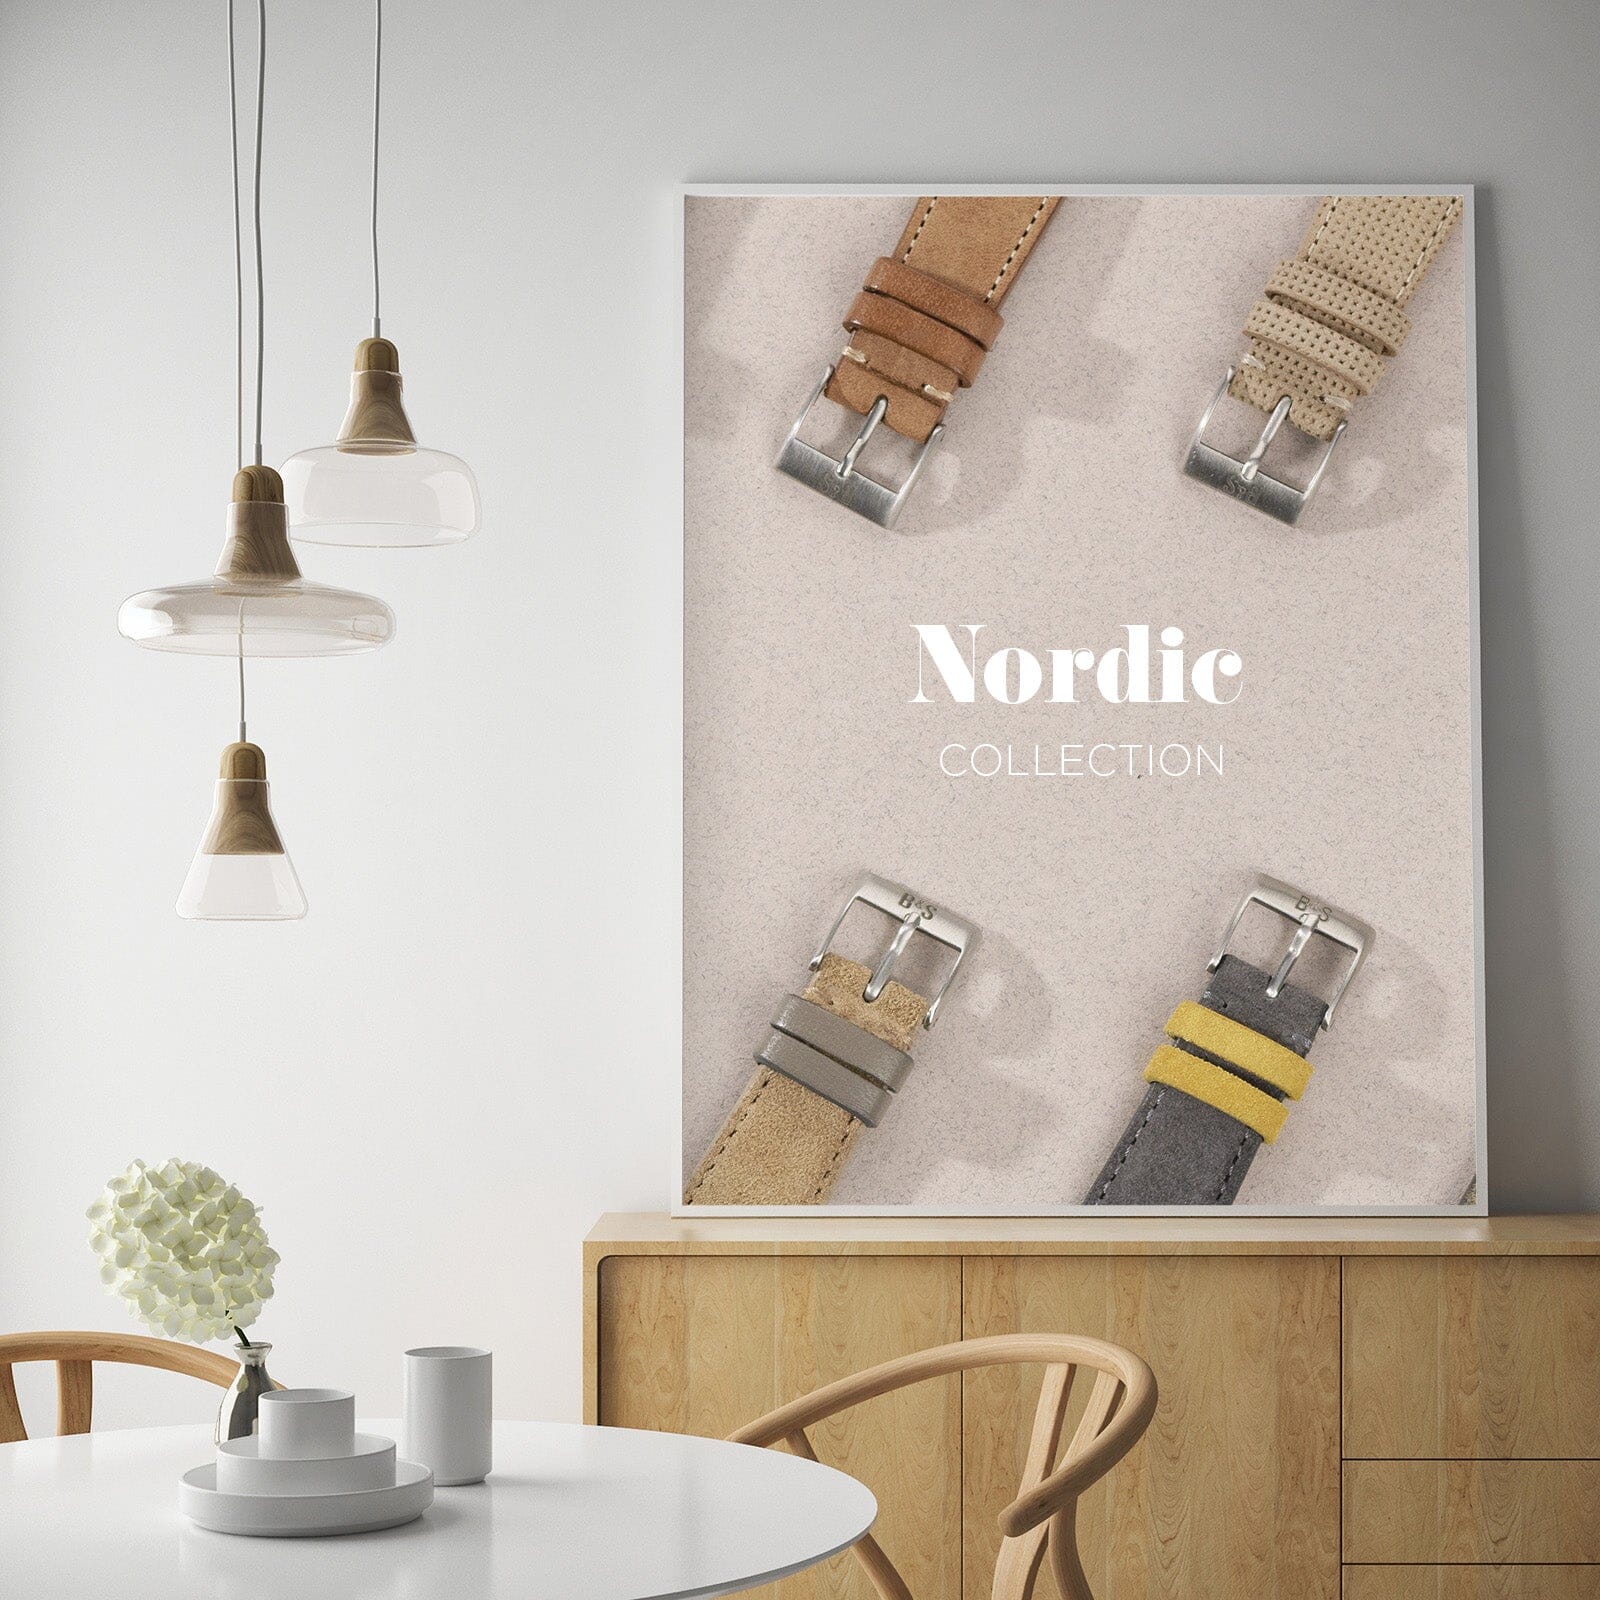 The Nordic Collection